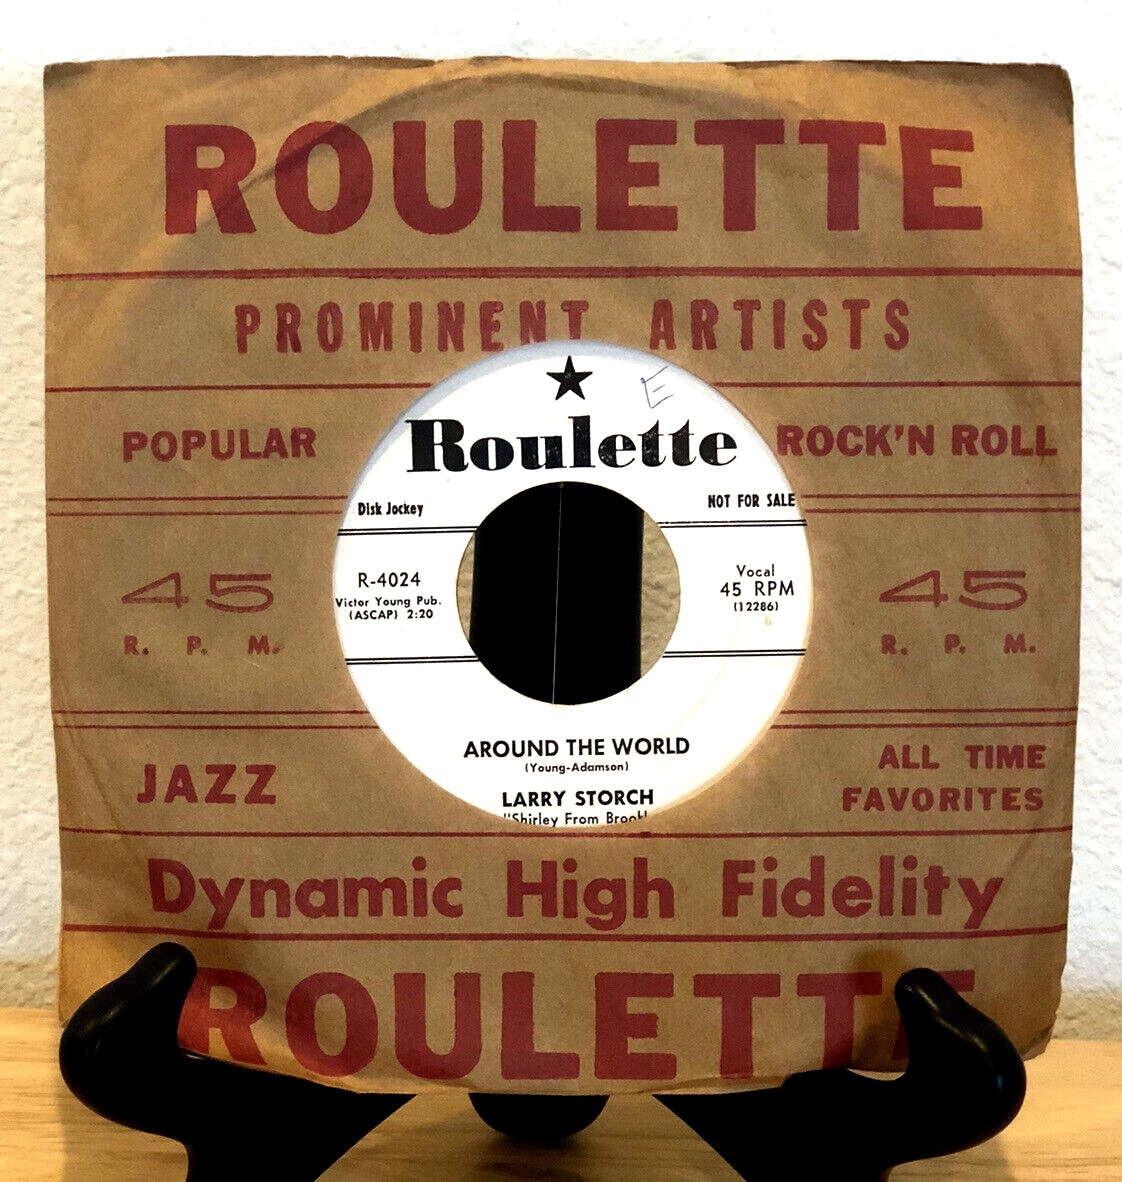 VINTAGE 1957 ROULETTE PROMO LARRY STORCH AROUND THE WORLD 45 RPM RECORD